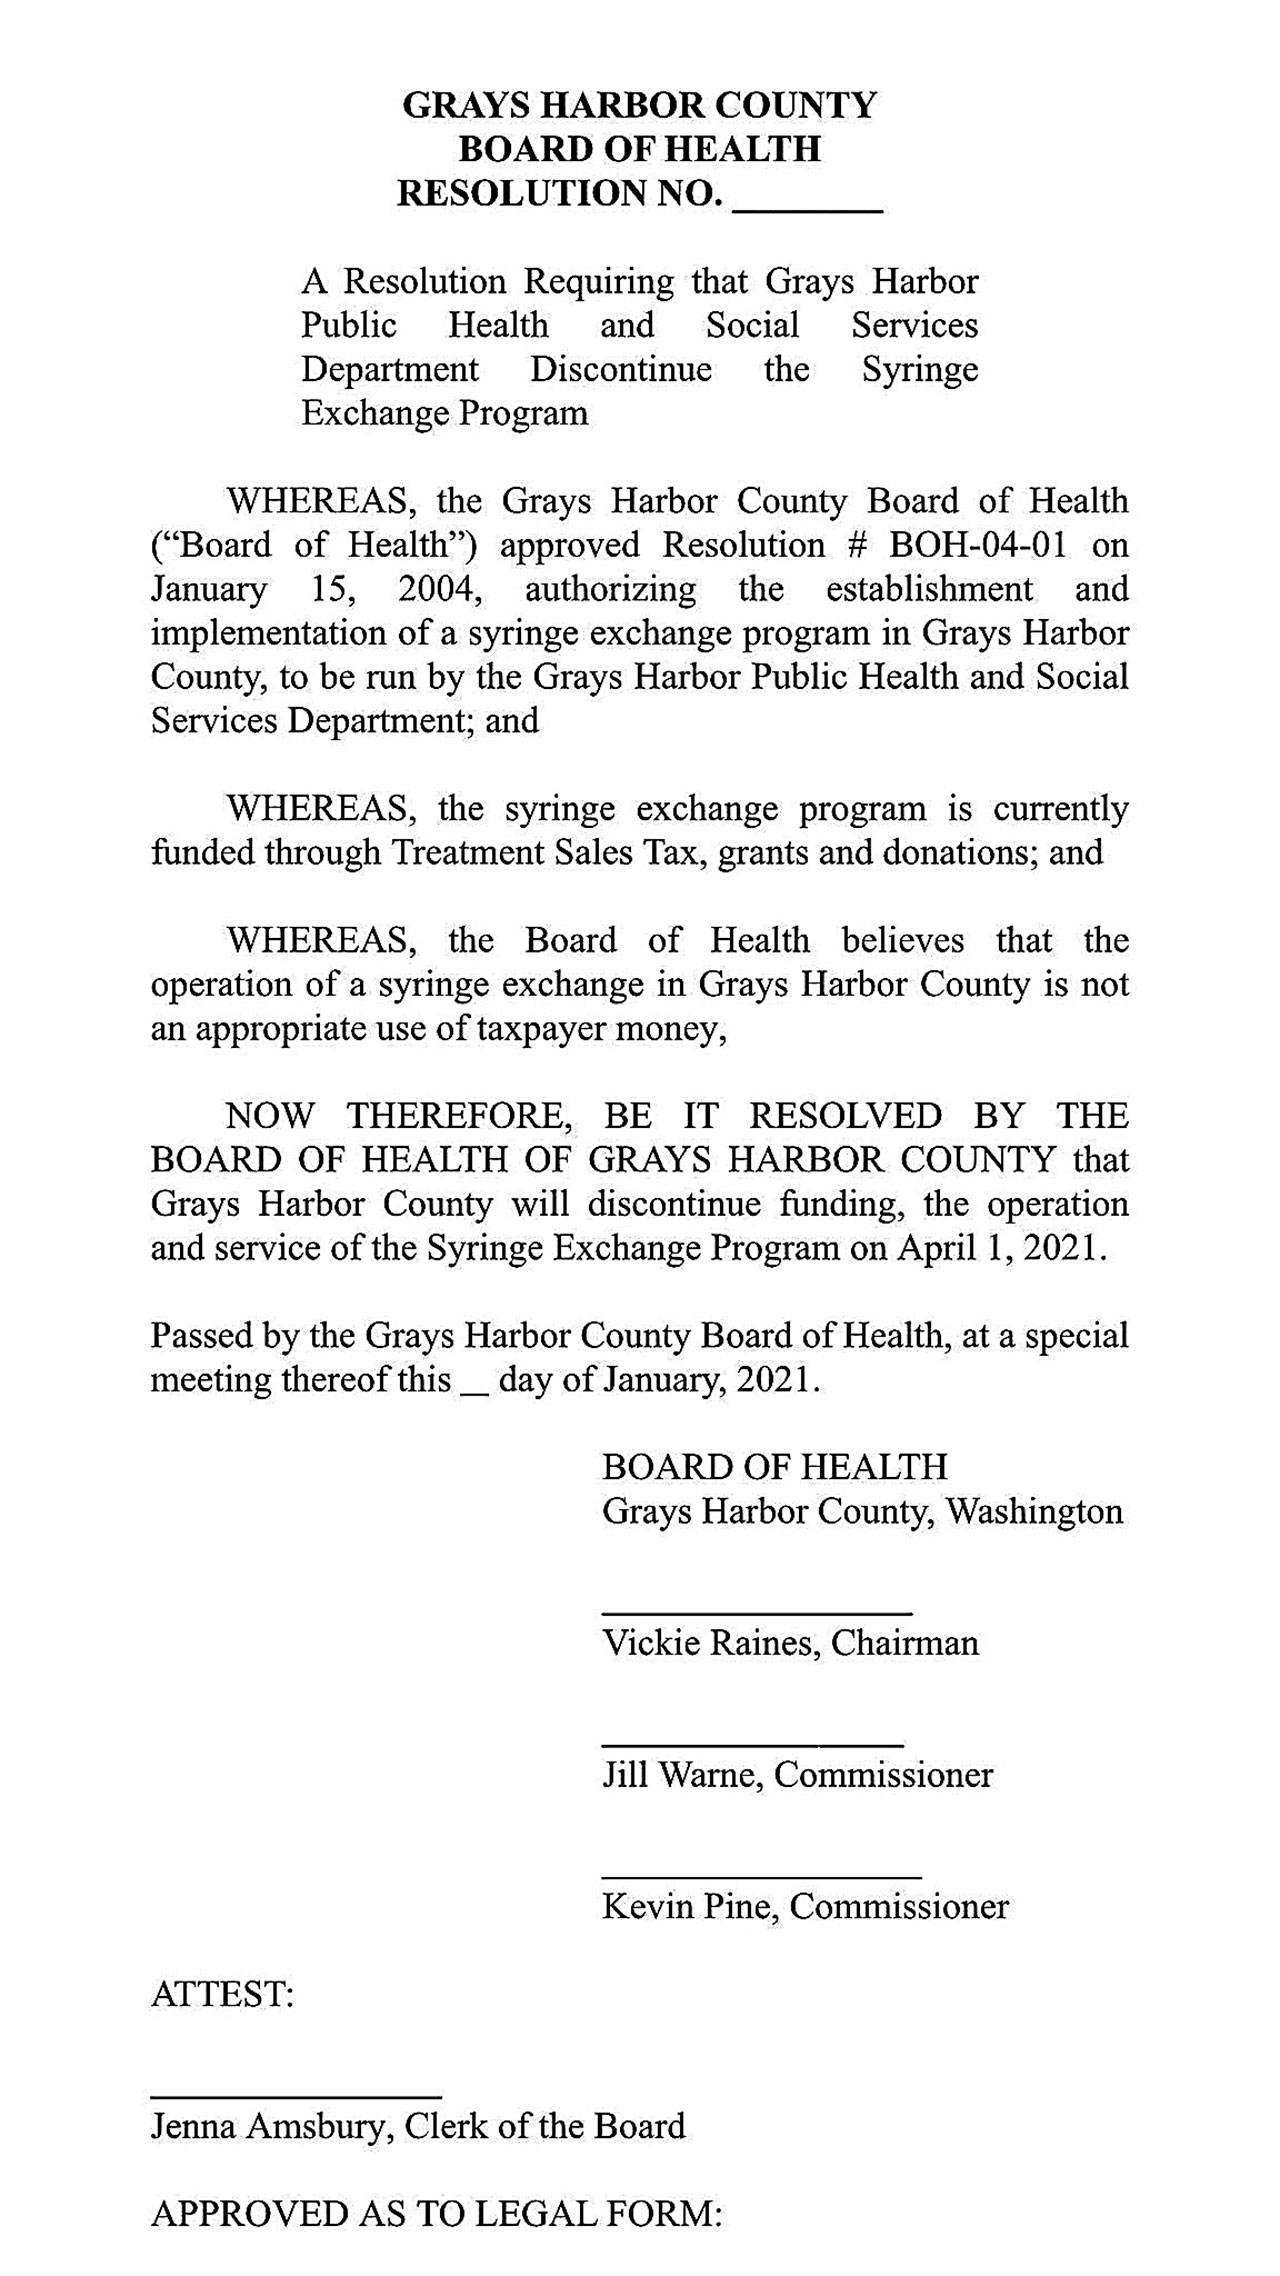 Needle exchange resolution to the county board of health.